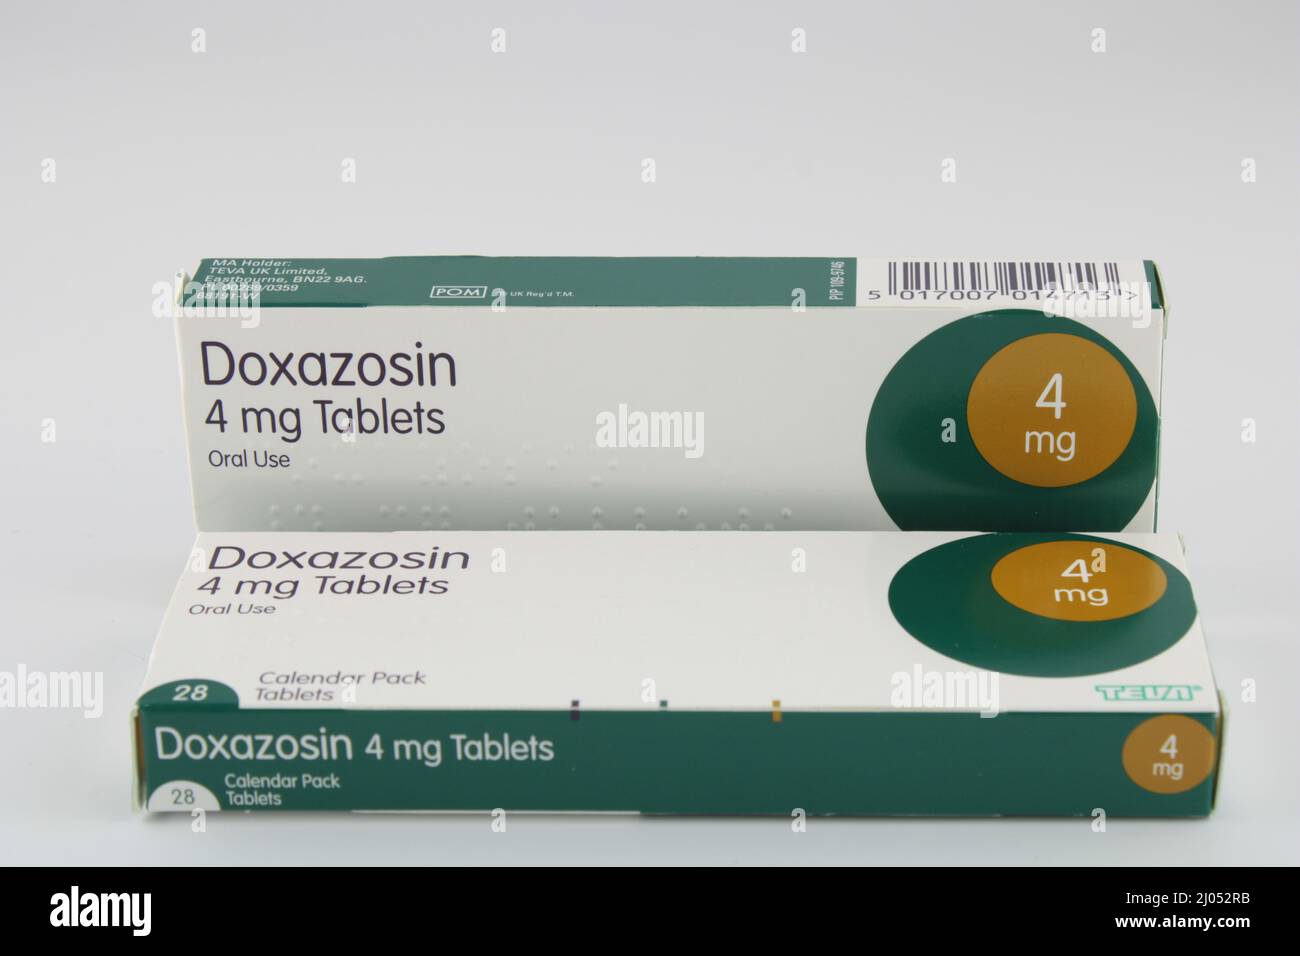 Boxes of Doxazosin tablets 4mg prescribed to treat high blood pressure. Stock Photo